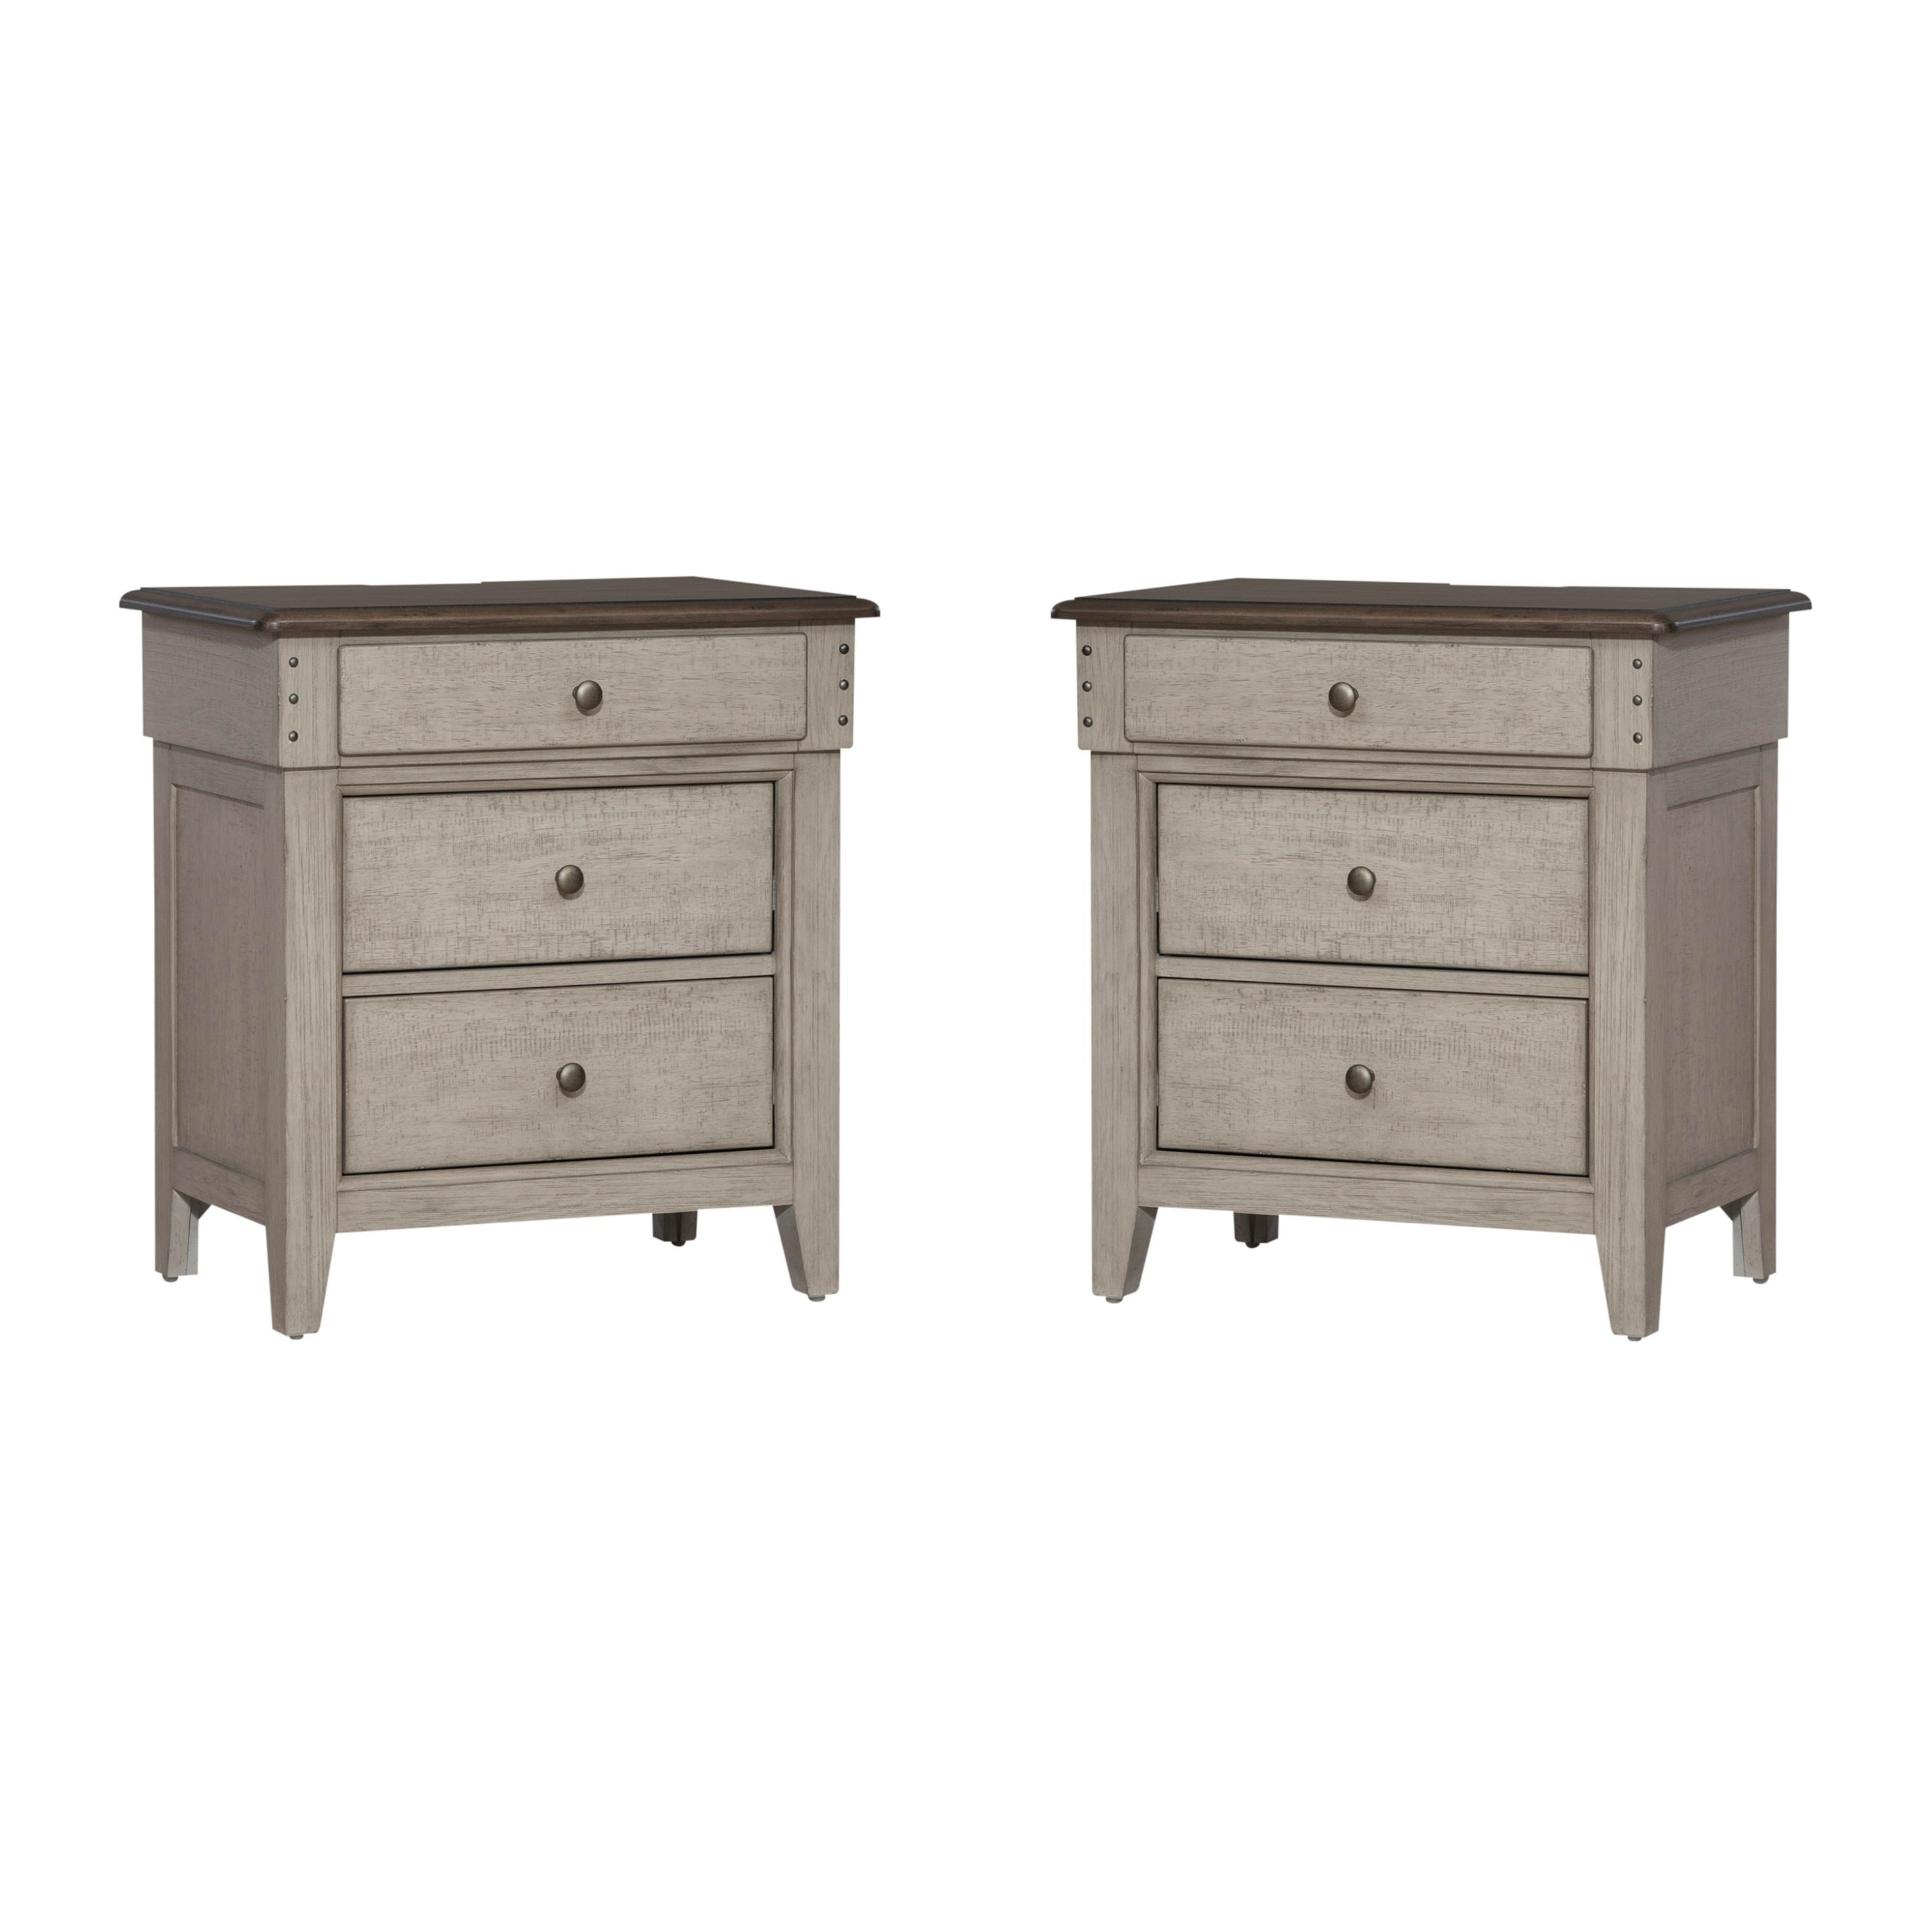 Contemporary, Cottage Nightstand Set Ivy Hollow (457-BR) 457-BR61-Set-2 in Taupe 